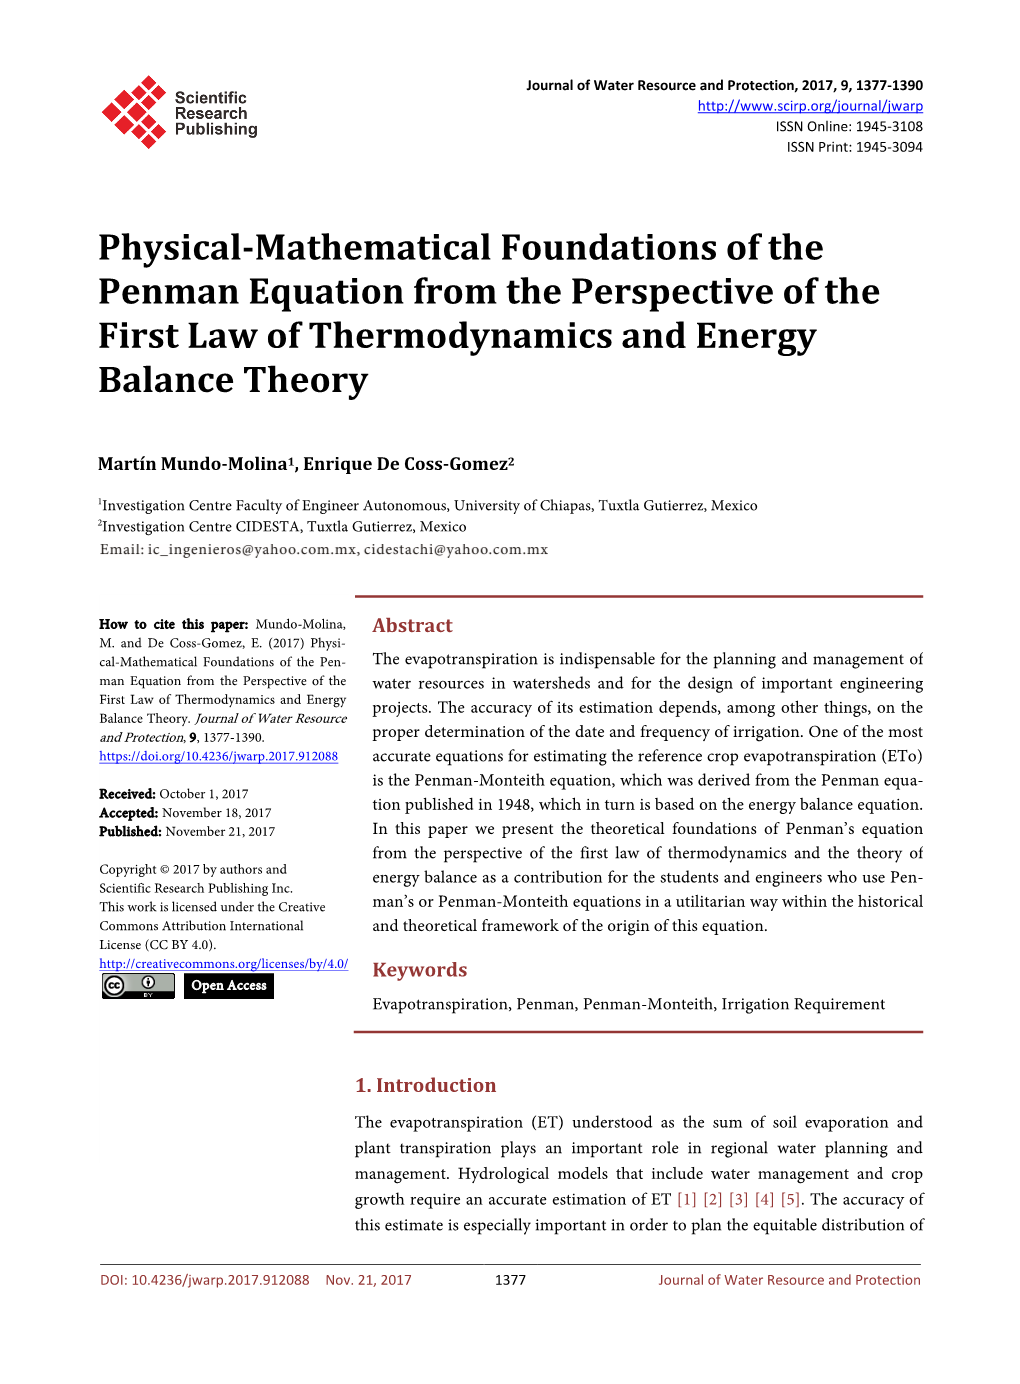 Physical-Mathematical Foundations of the Penman Equation from the Perspective of the First Law of Thermodynamics and Energy Balance Theory